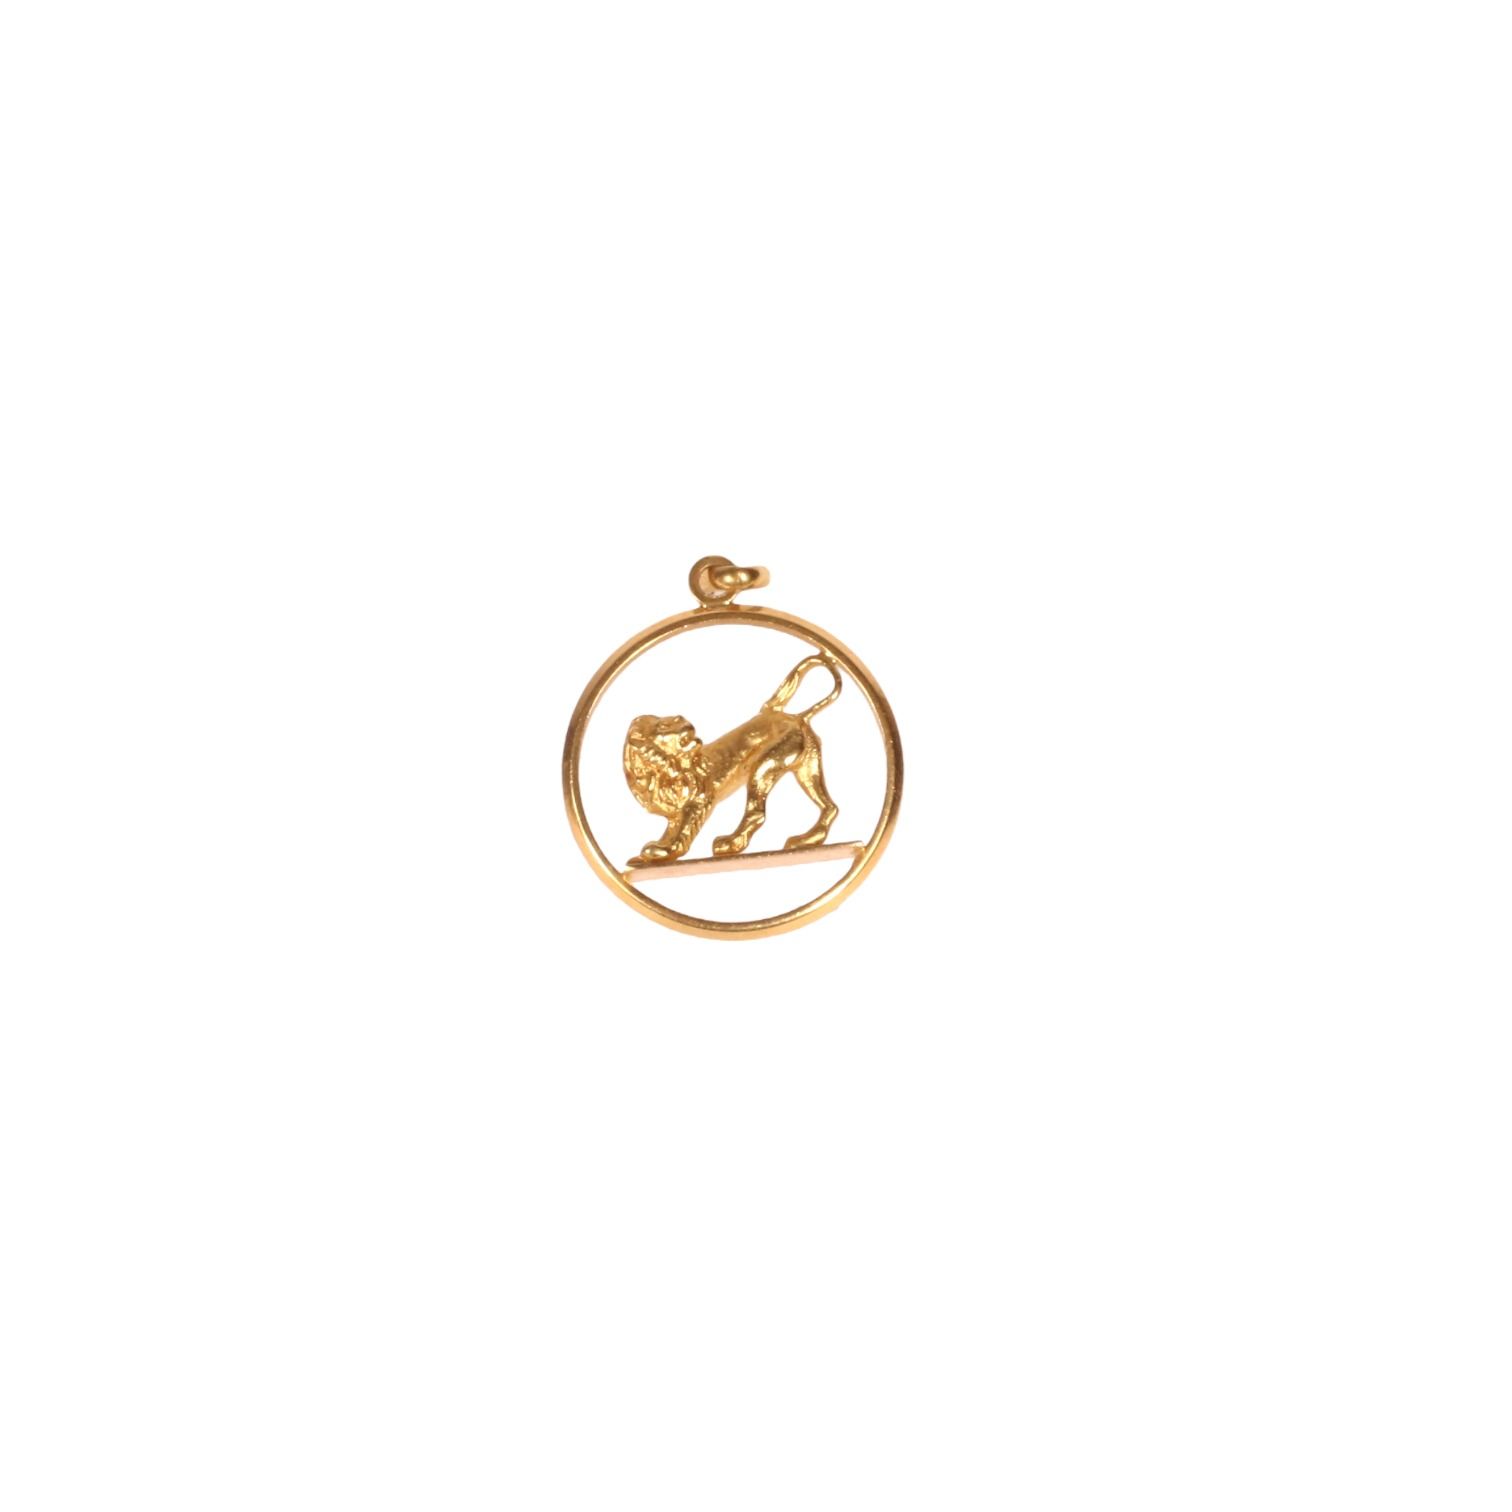 Null * Pendant lion in a circle in 18K yellow gold 750/000

weight : 7,8 g